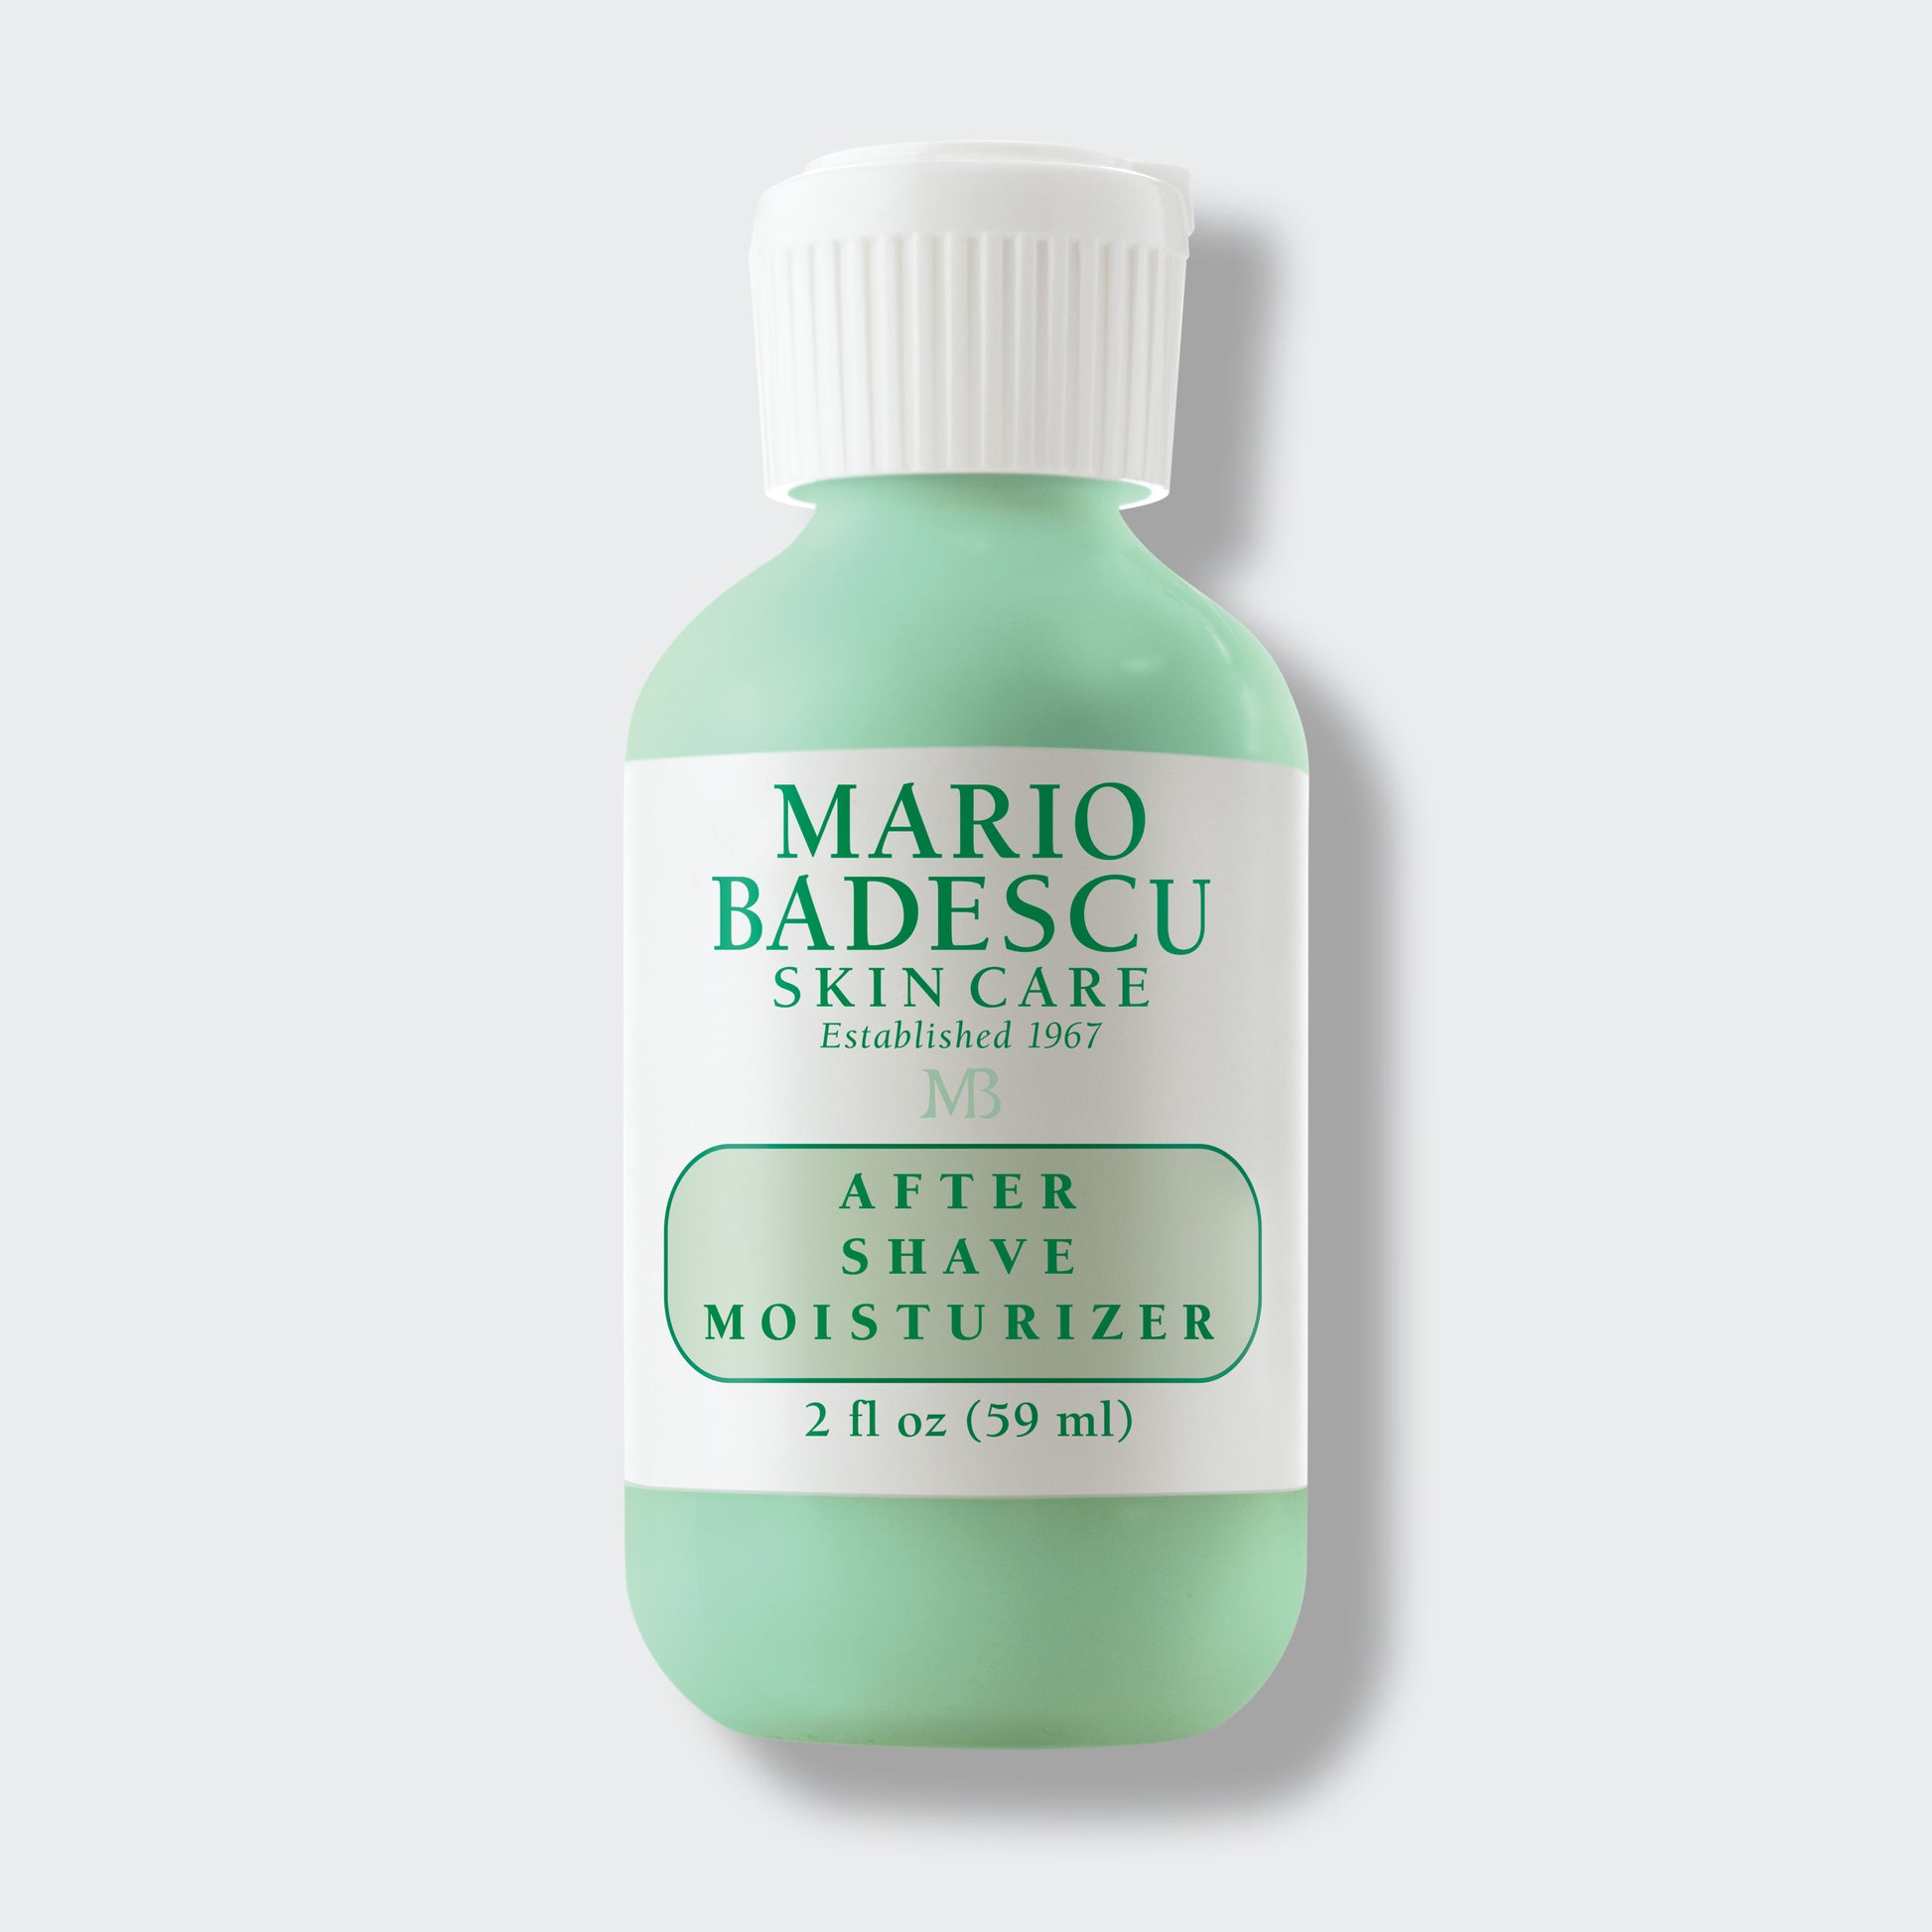 Mario Badescu After Shave Hydrating Moisturizer